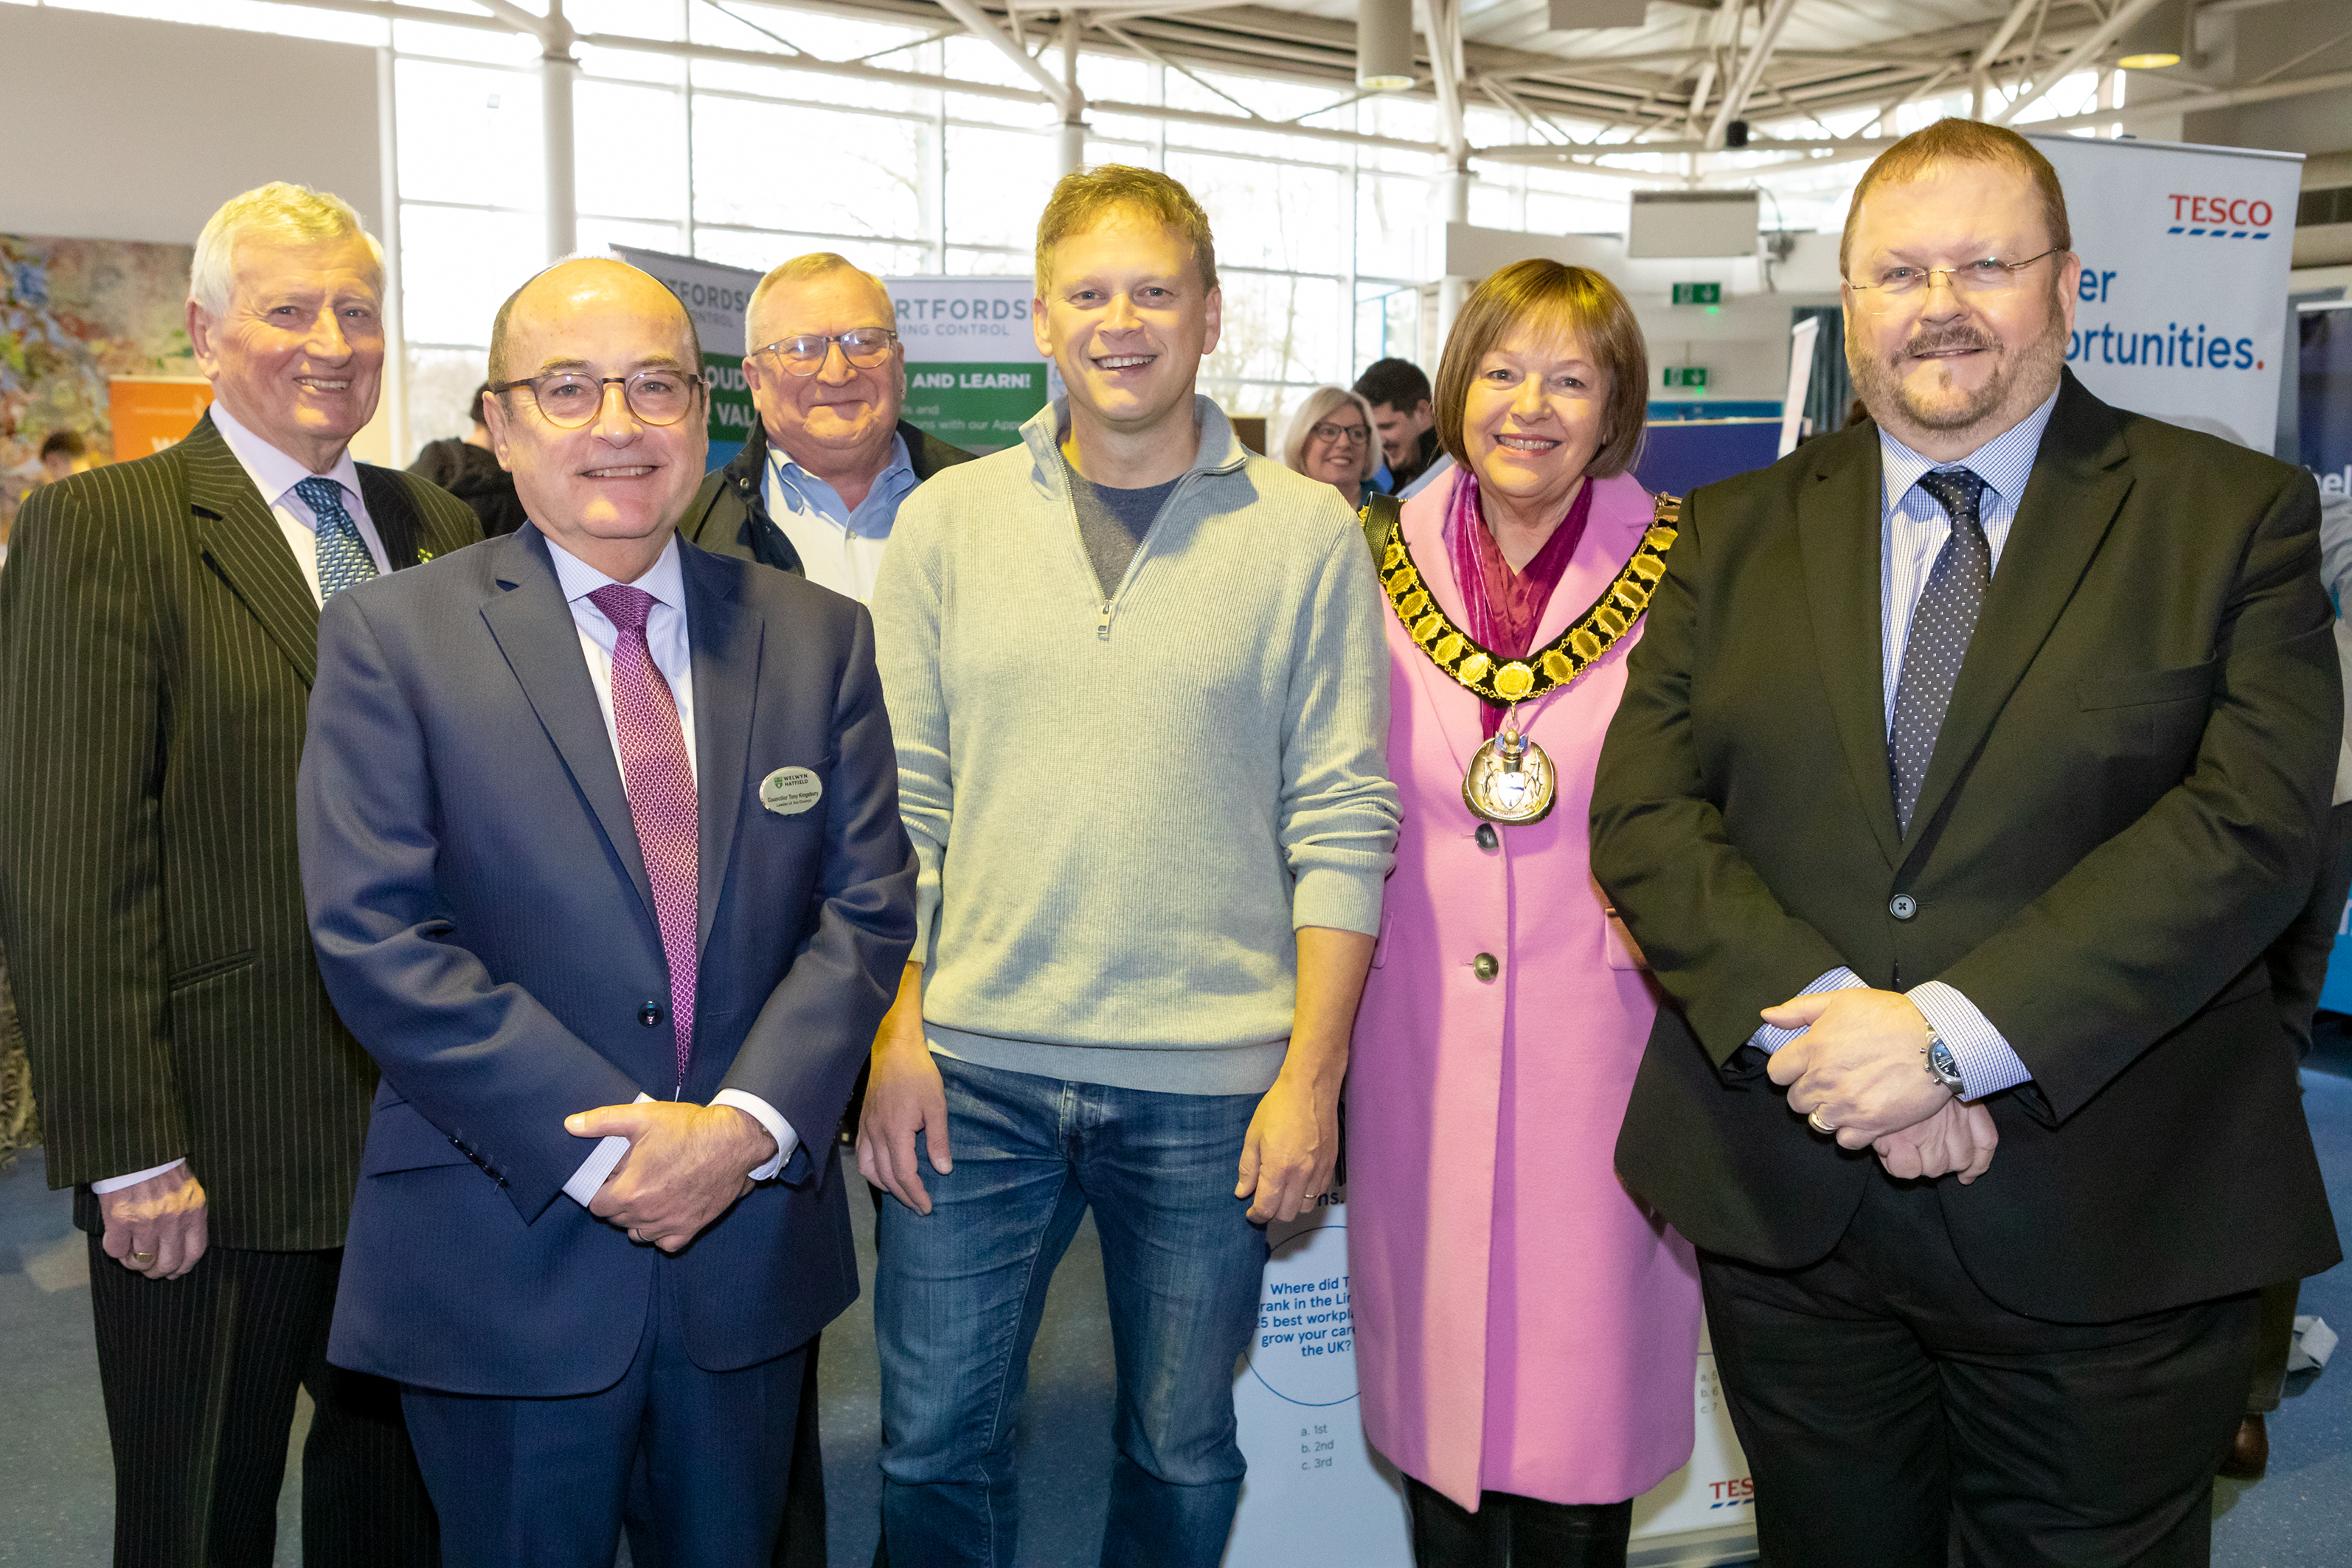 MP Grant Shapps, Leader of the Council, the Mayor and Chair of Herts LEP gather at the careers fair